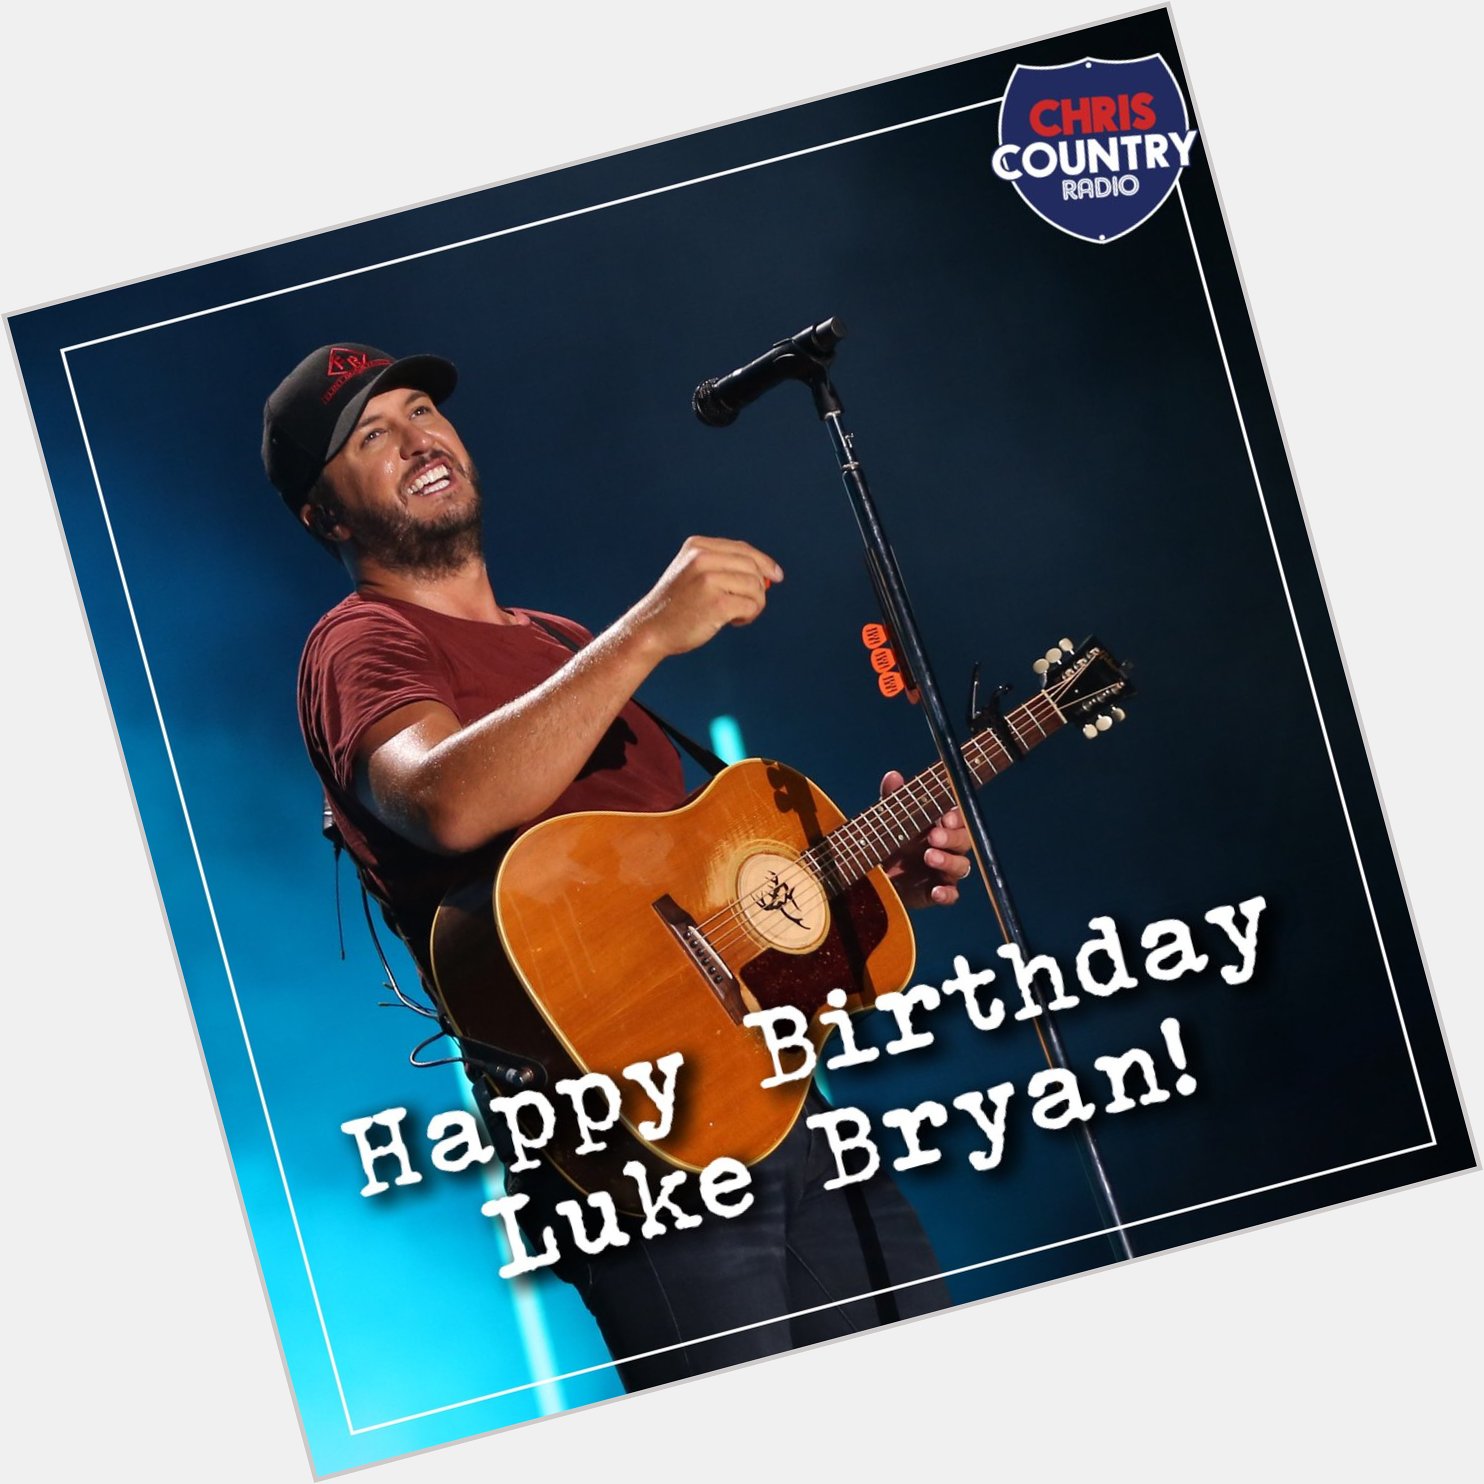 Happy Birthday !!

We ll play two Luke Bryan tracks every hour this weekend on Chris Country 